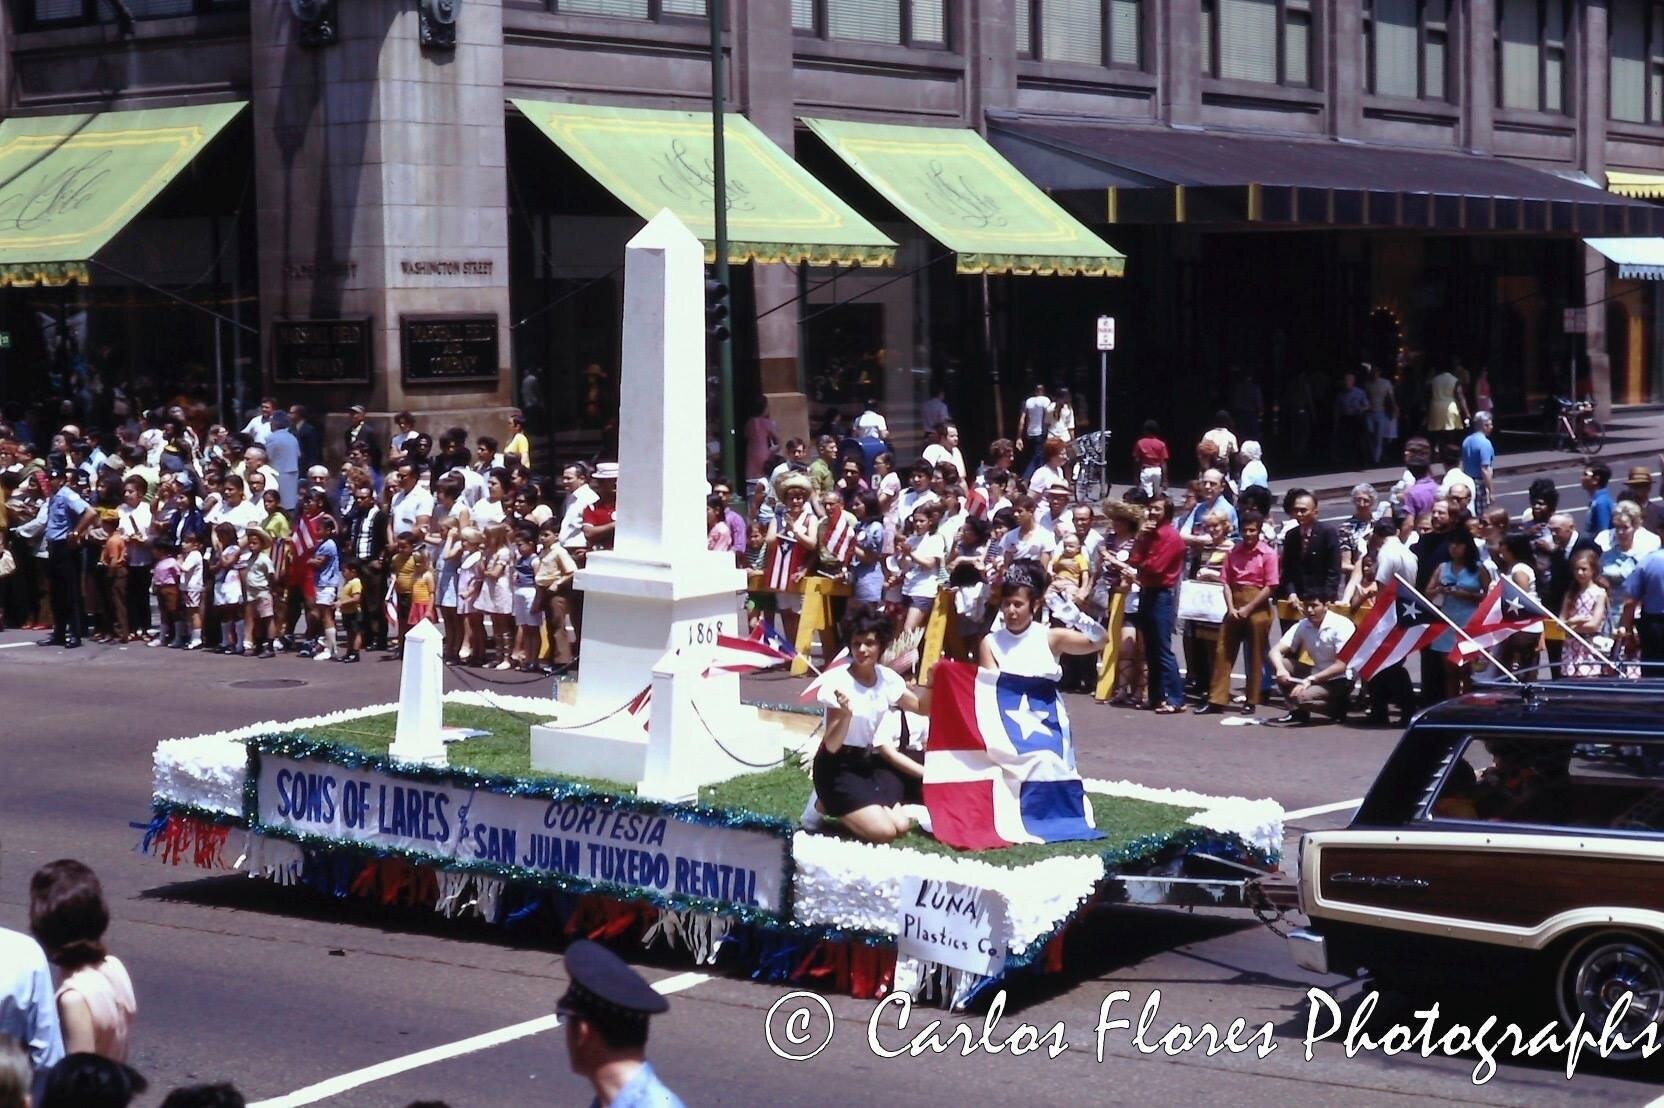  "Hijos De Lares" float at the 1971 Chicago Puerto Rican Parade on State Street in Downtown Chicago, IL. 